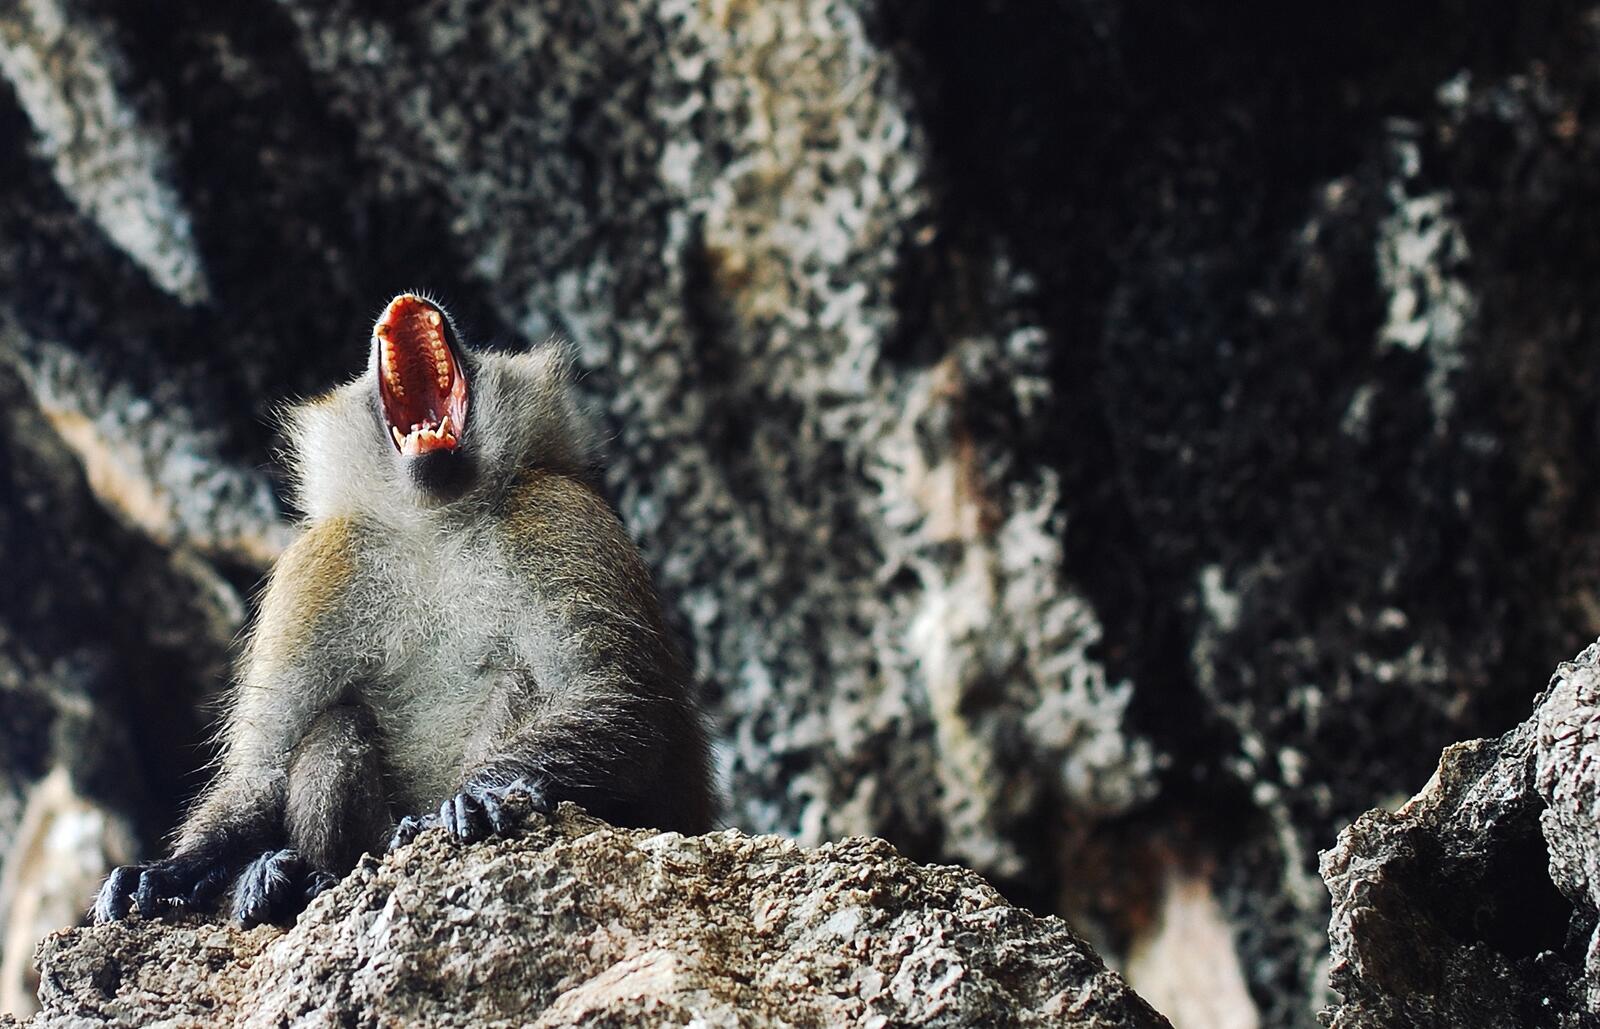 Free photo The monkey in the cave cries out loudly